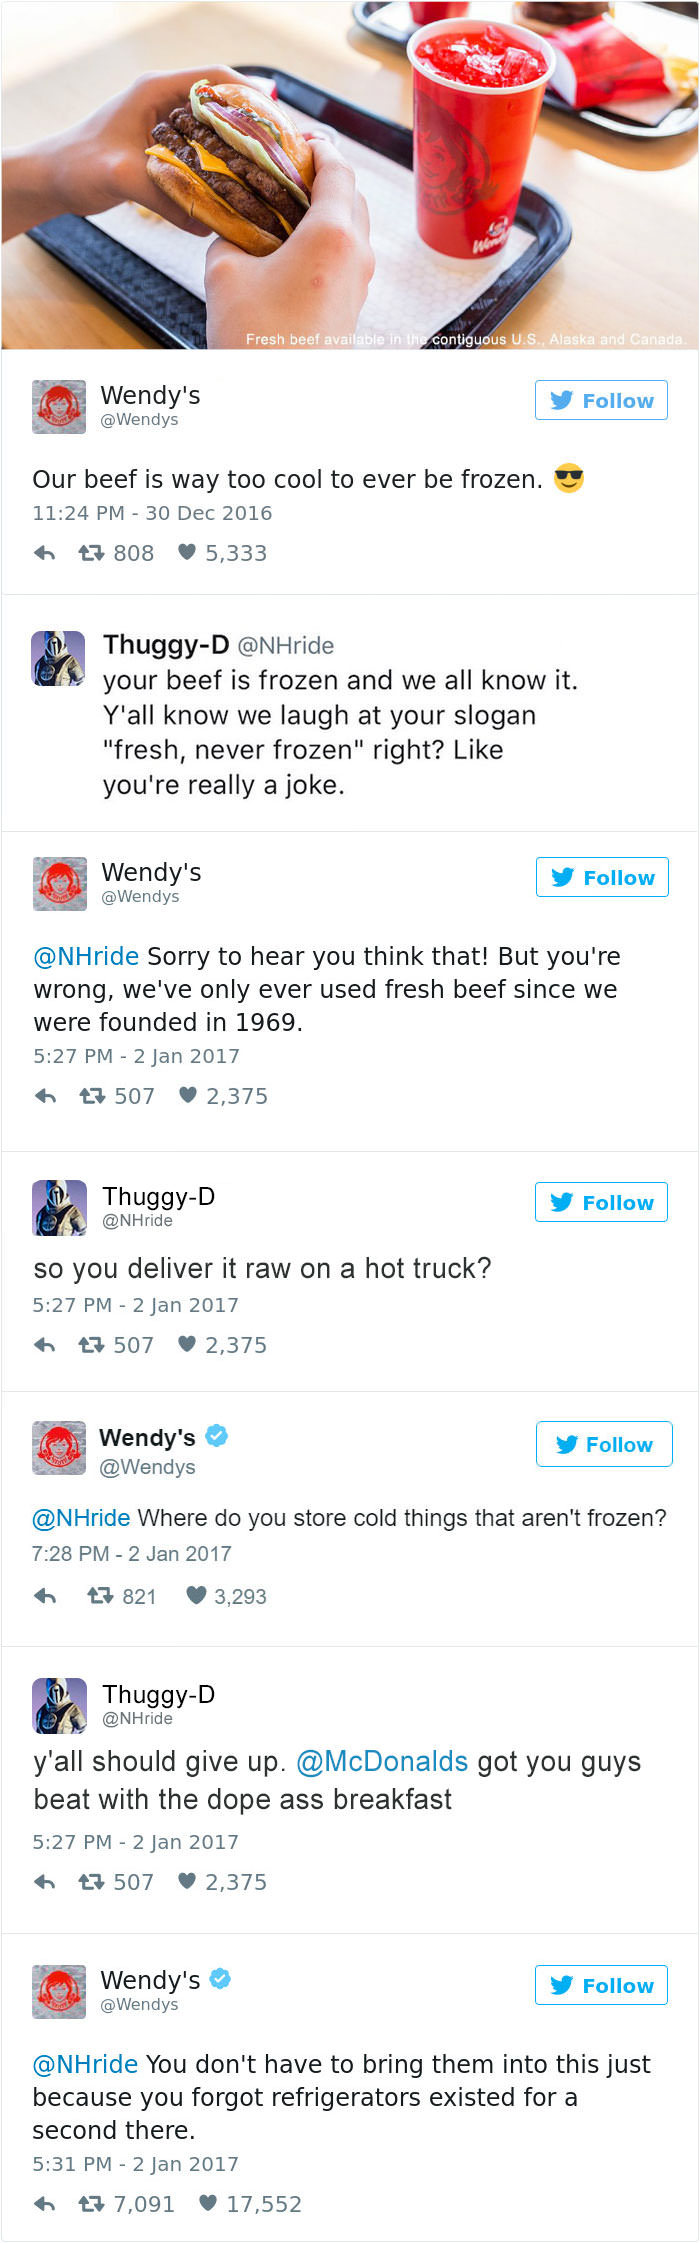 Guy deletes his twitter account after wendy's roast